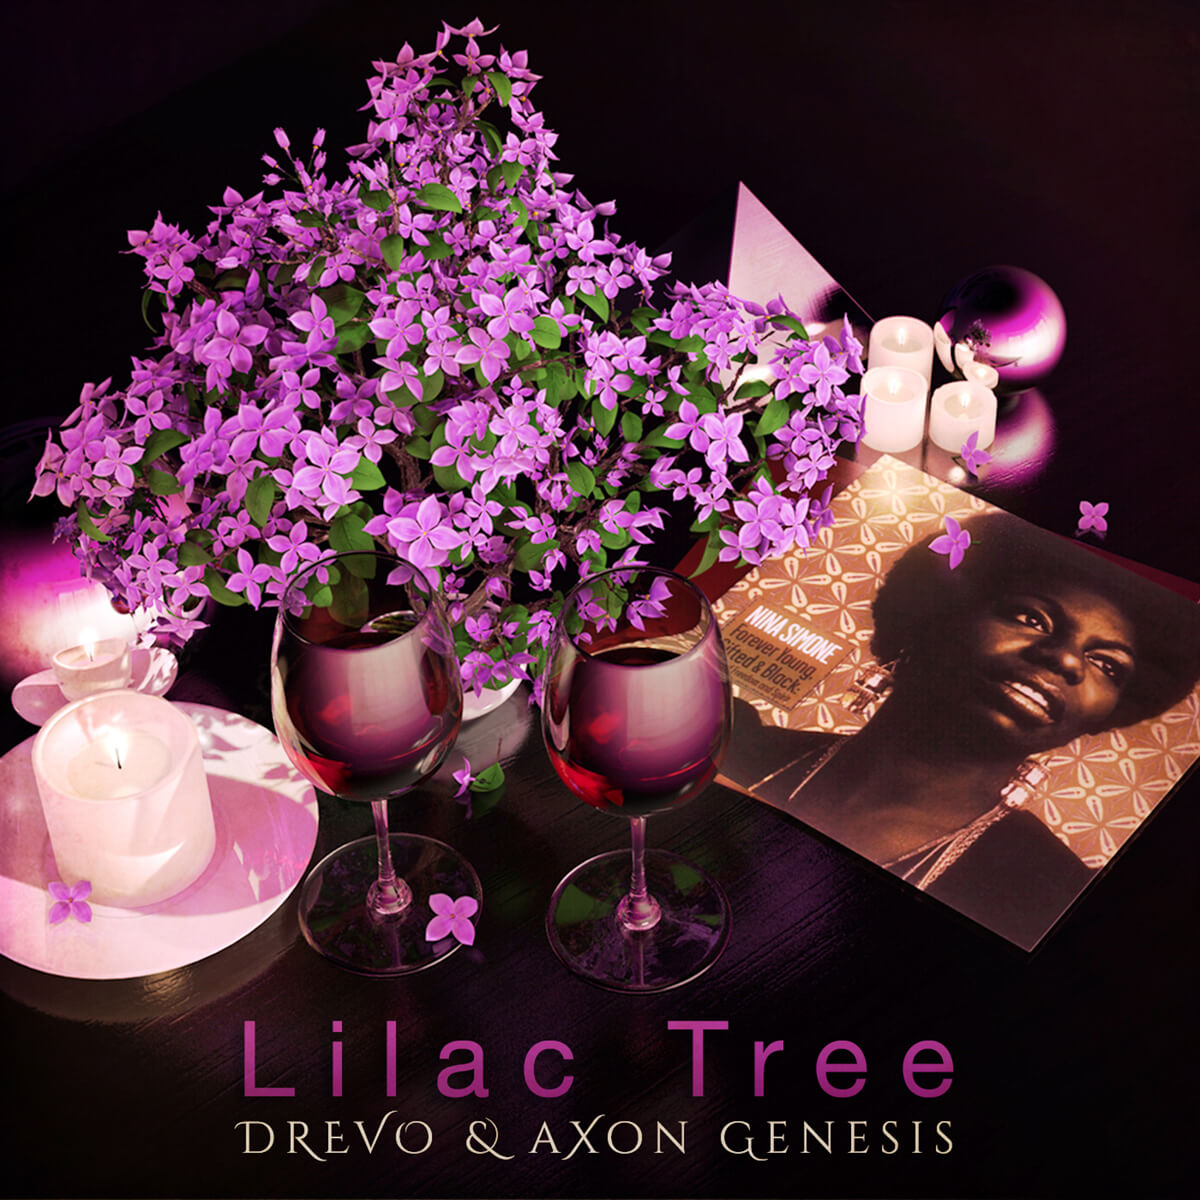 Lilac Tree Music and Cover Art by Axon Genesis